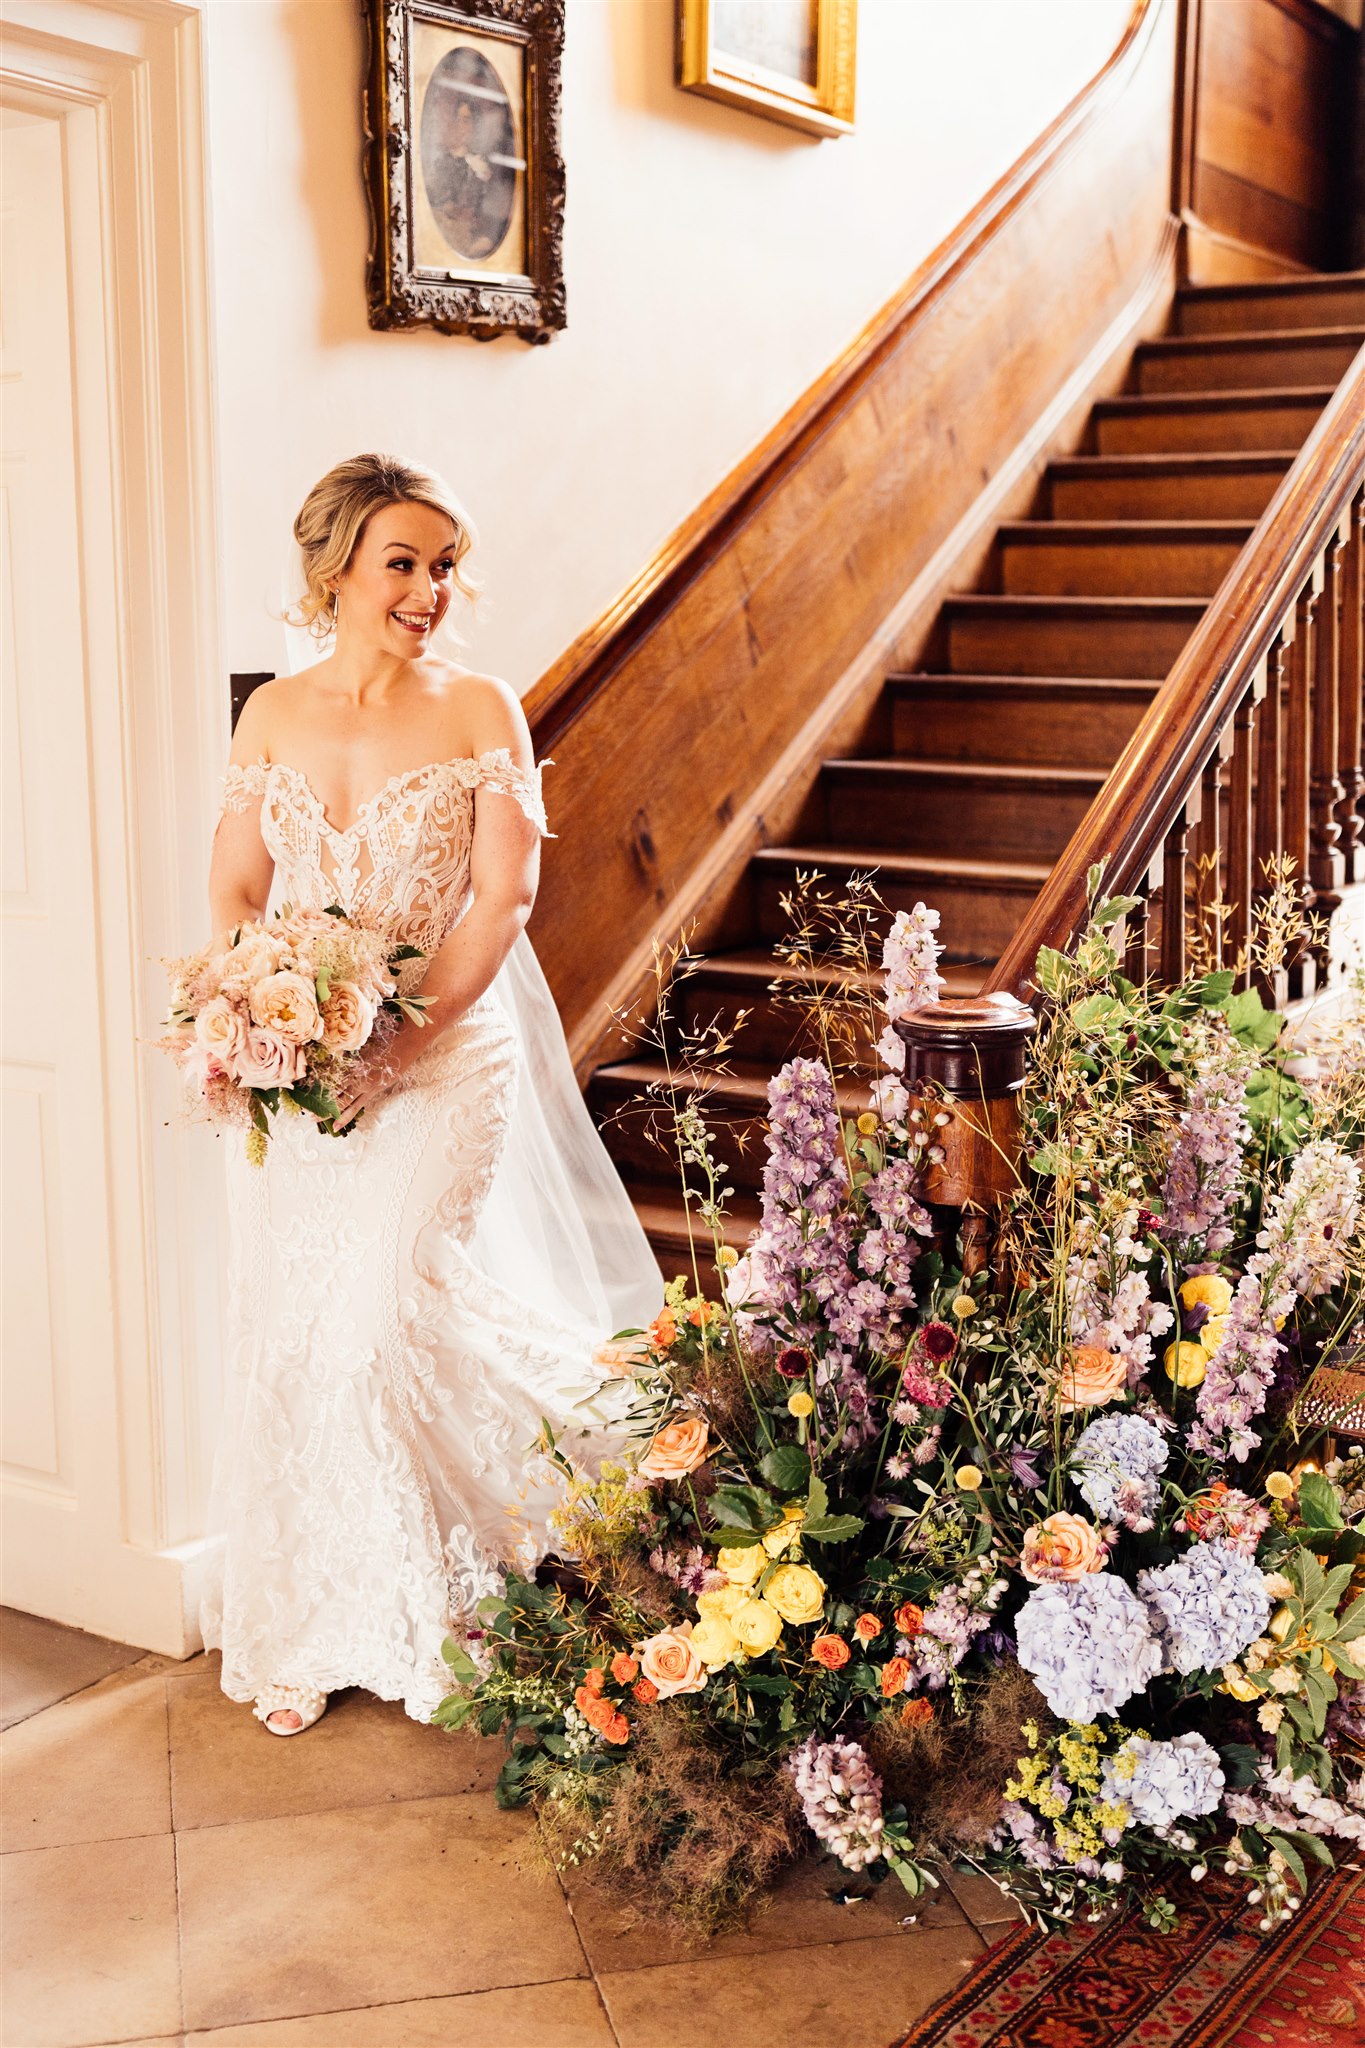 A floor floral arrangement filled with green foliage and pink, blue and lilac tones sits next to an old wooden staircase down which a bride is descending